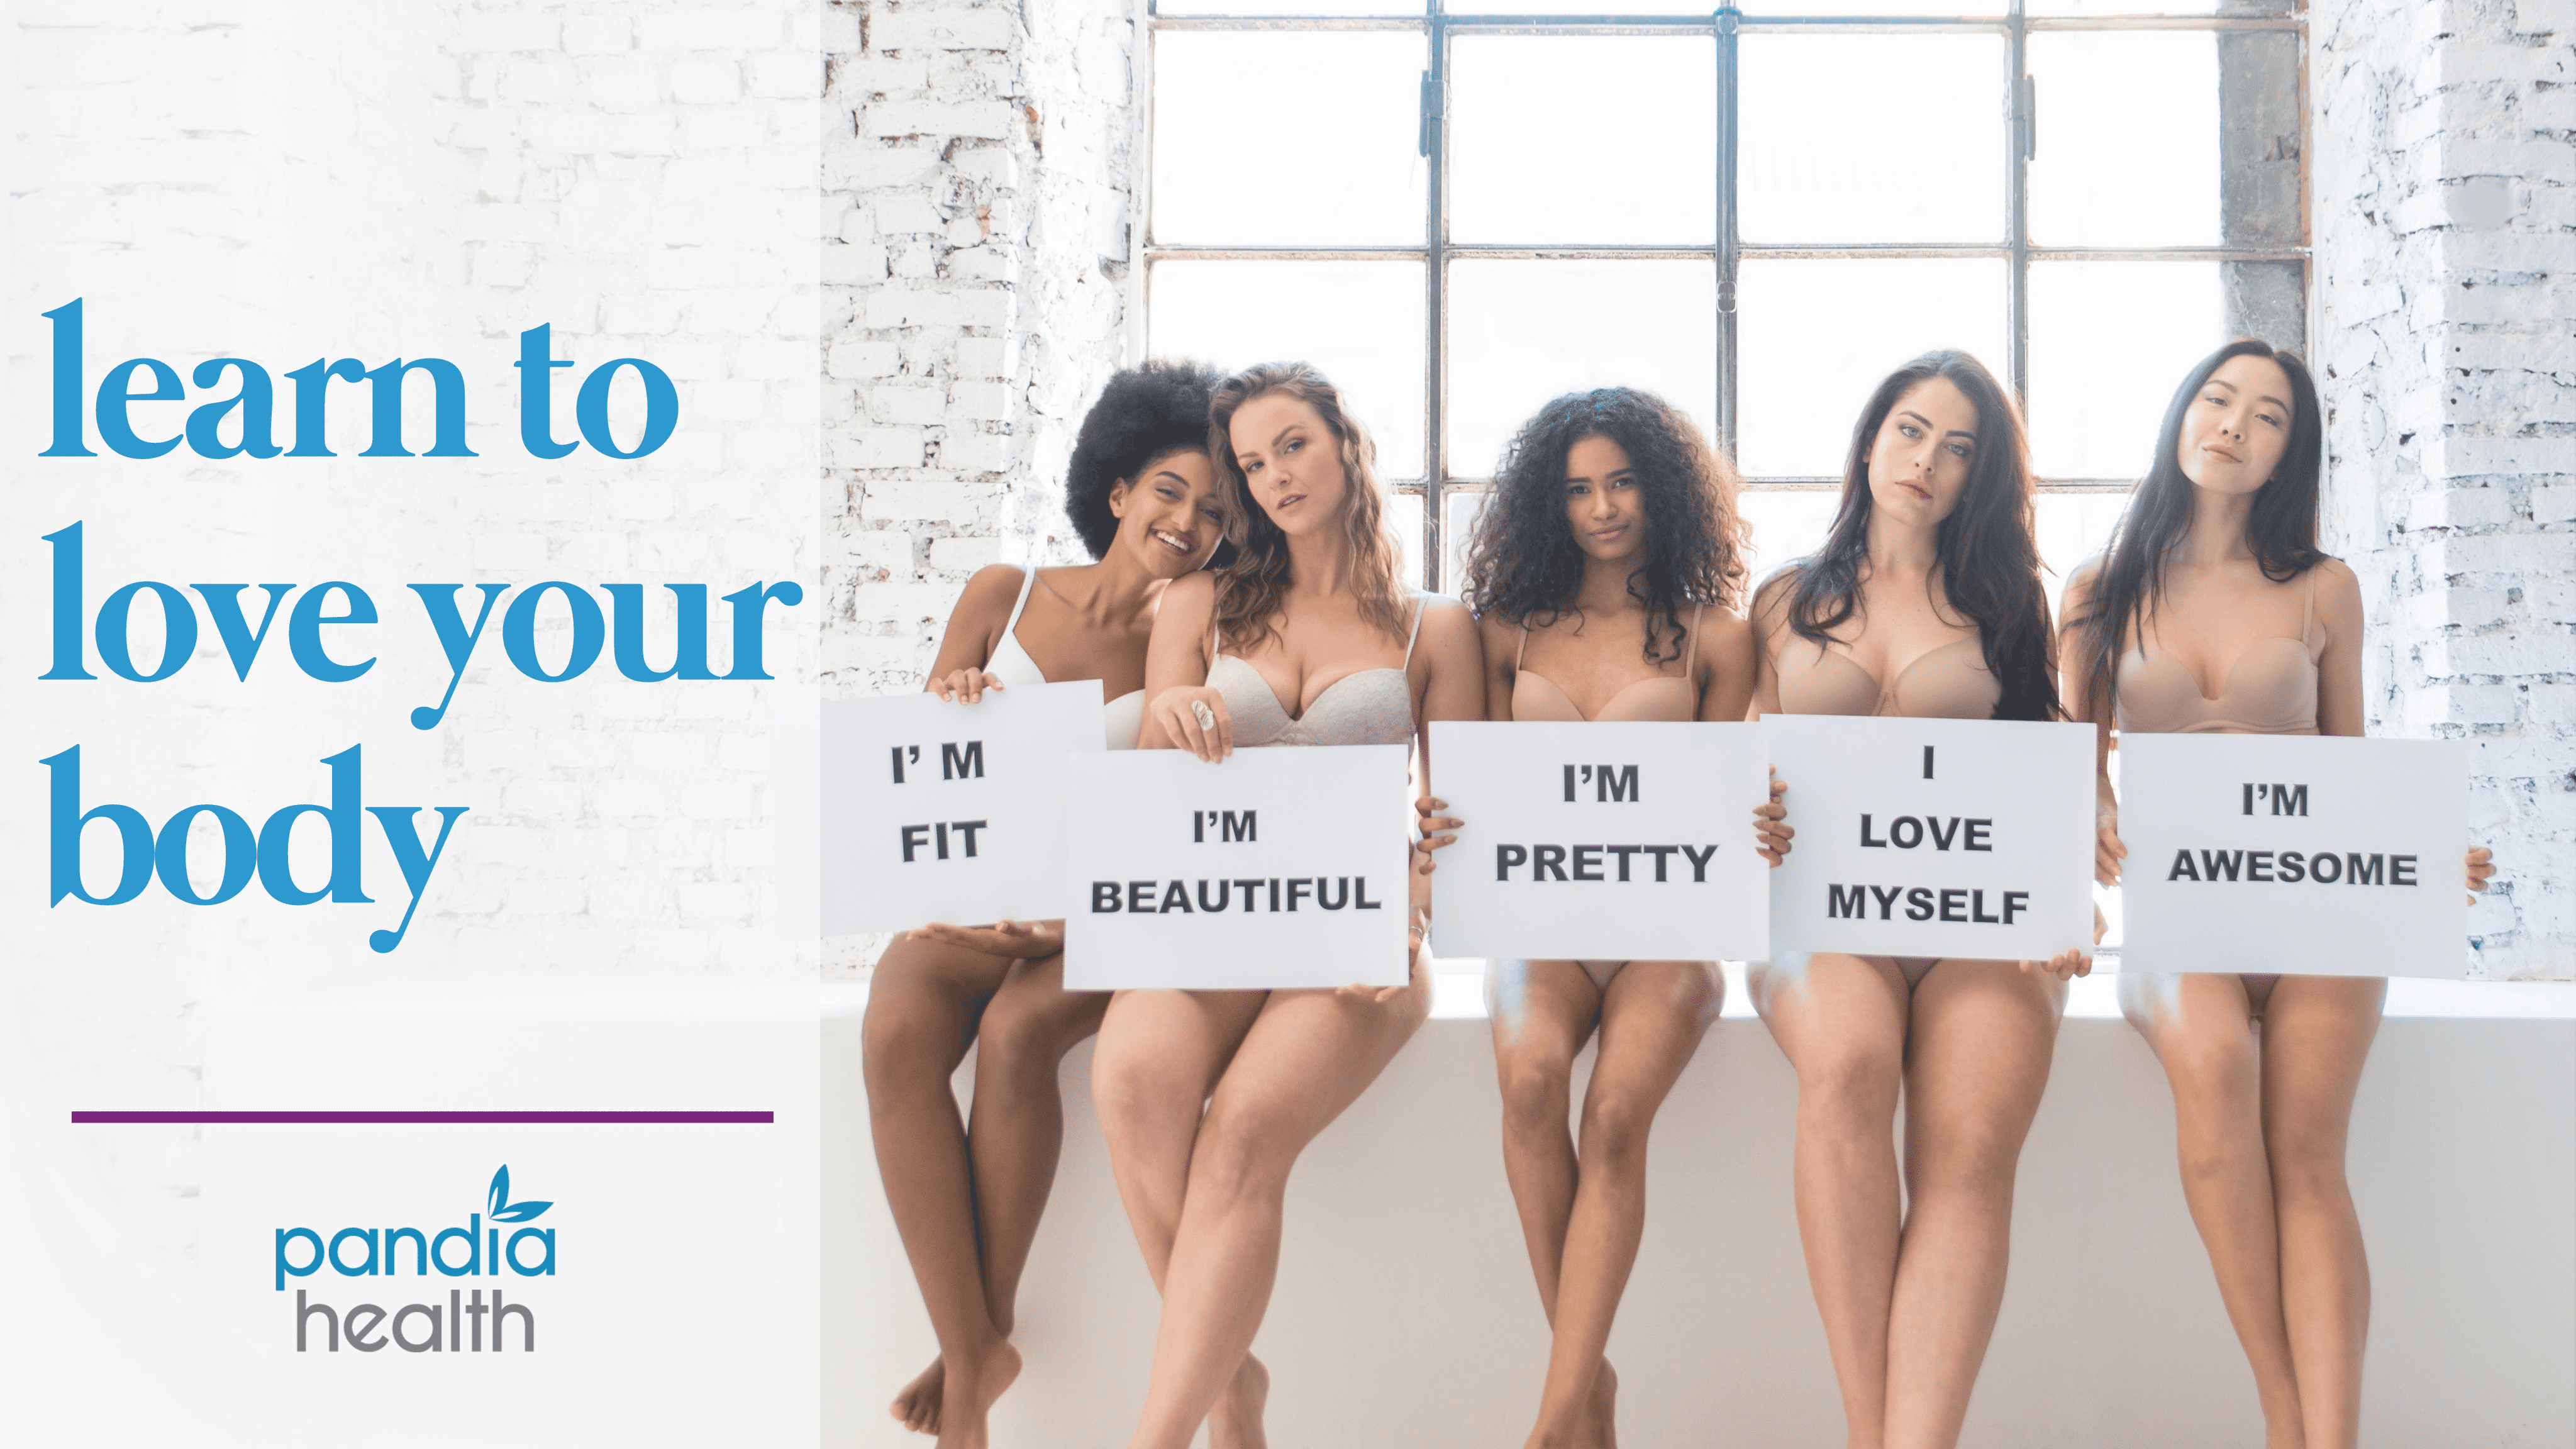 five girls in bras and underwear holding signs promoting body positivity